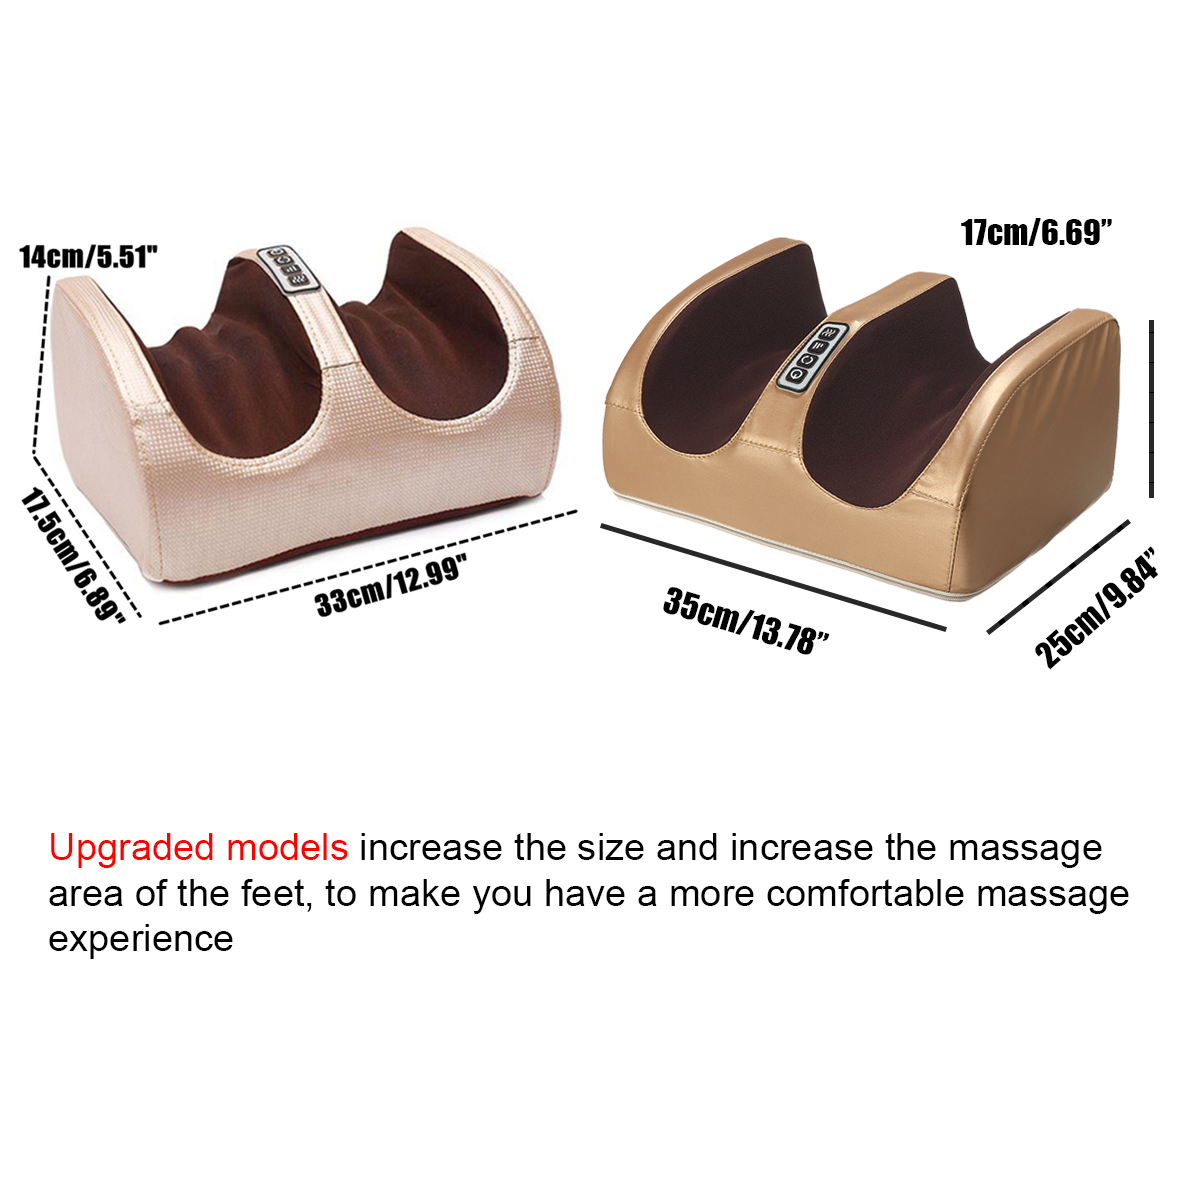 3-Speed-Electric-Foot-Massager-Machine-Vibration-Massage-Magnetism-Hot-Compress-Therapy-Leg-Relieve--1694192-14